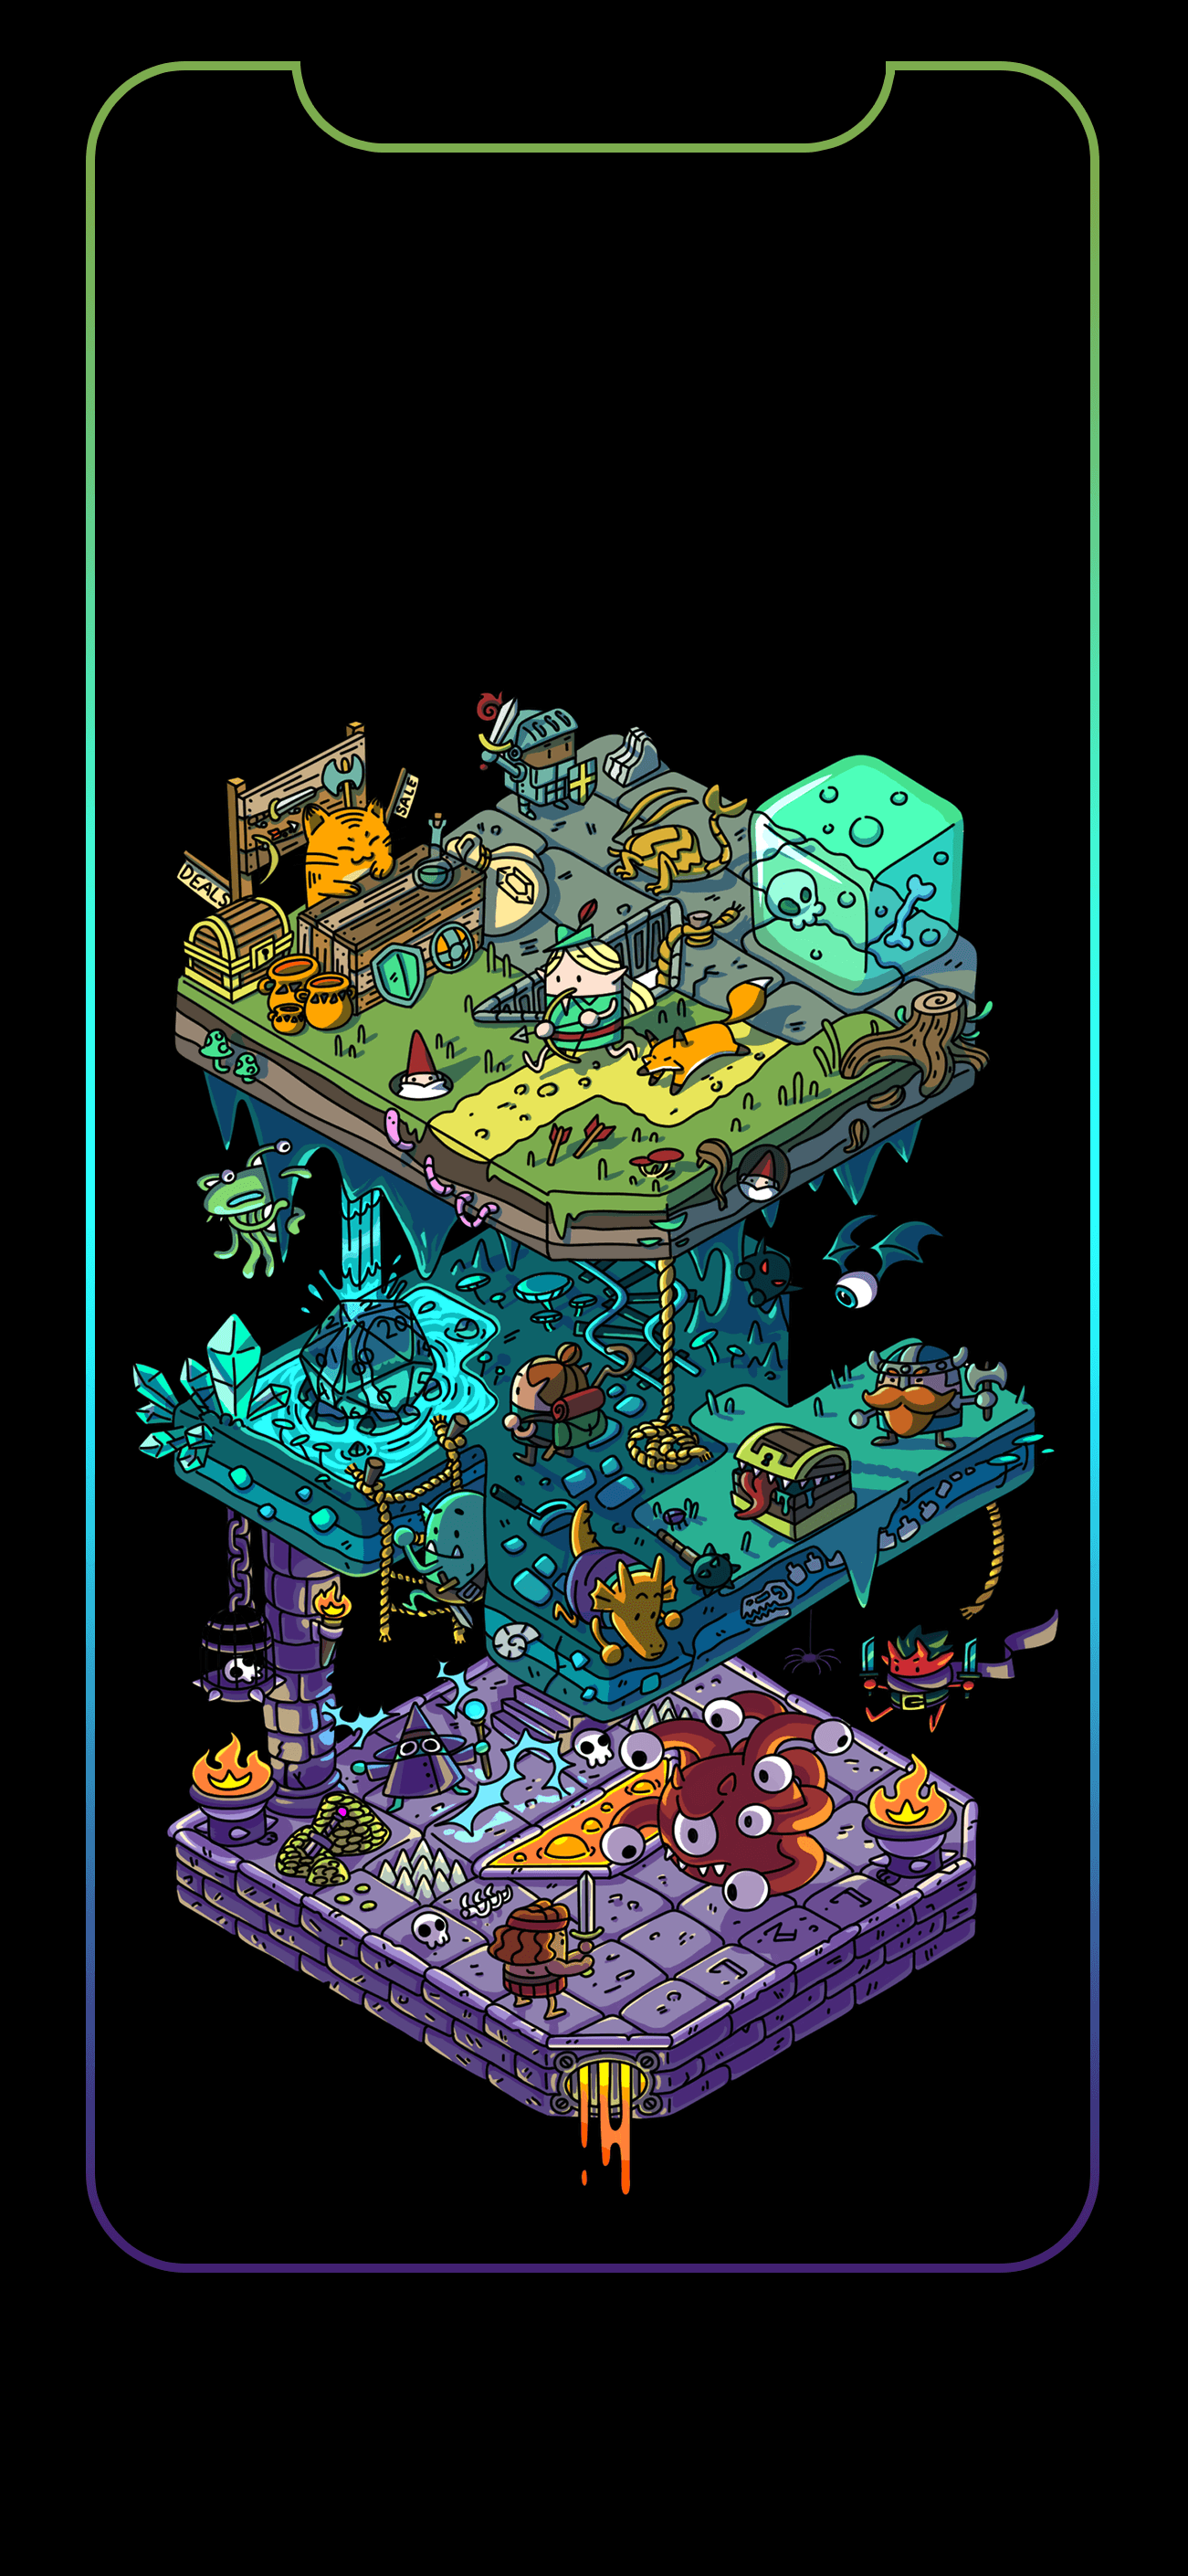 iPhone X Wallpapers based on the isometric DND art by /u